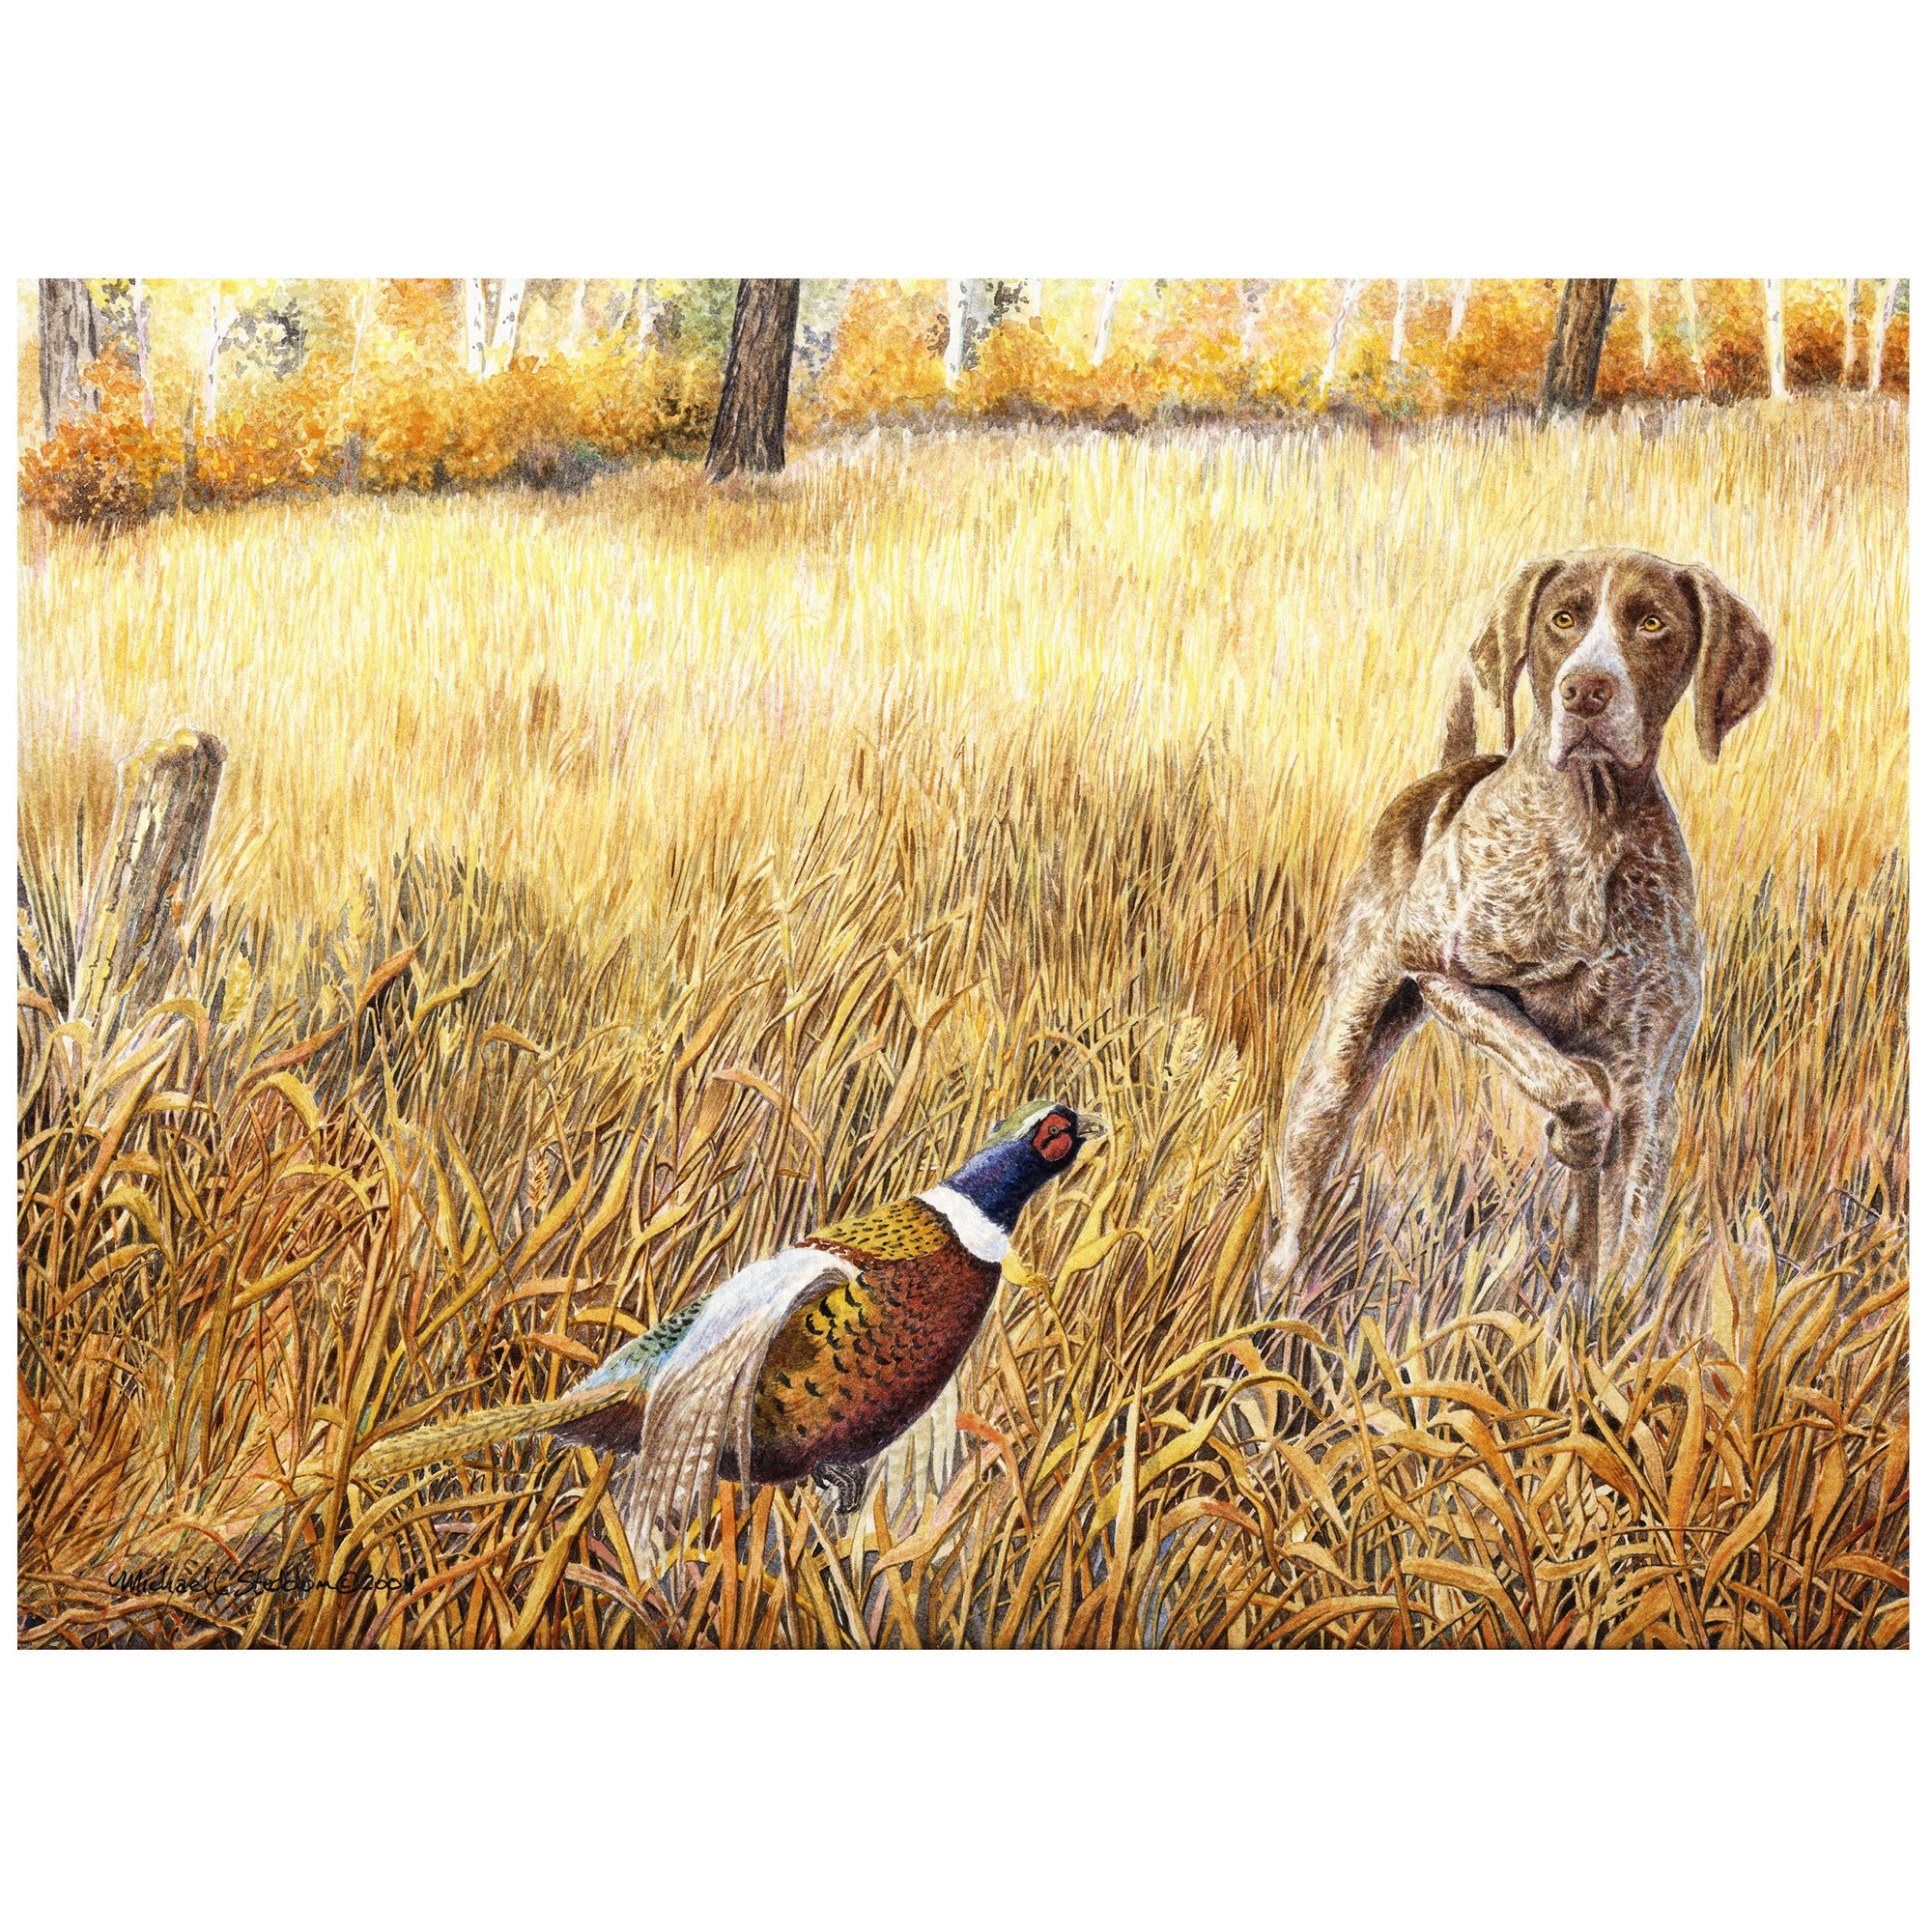 "GSP on Point" German Shorthaired Pointer Art Reproduction Print by Michael Steddum - Limited Edition Signed and Numbered German Shorthair Pointer Art Print - Ideal for a GSP Gift